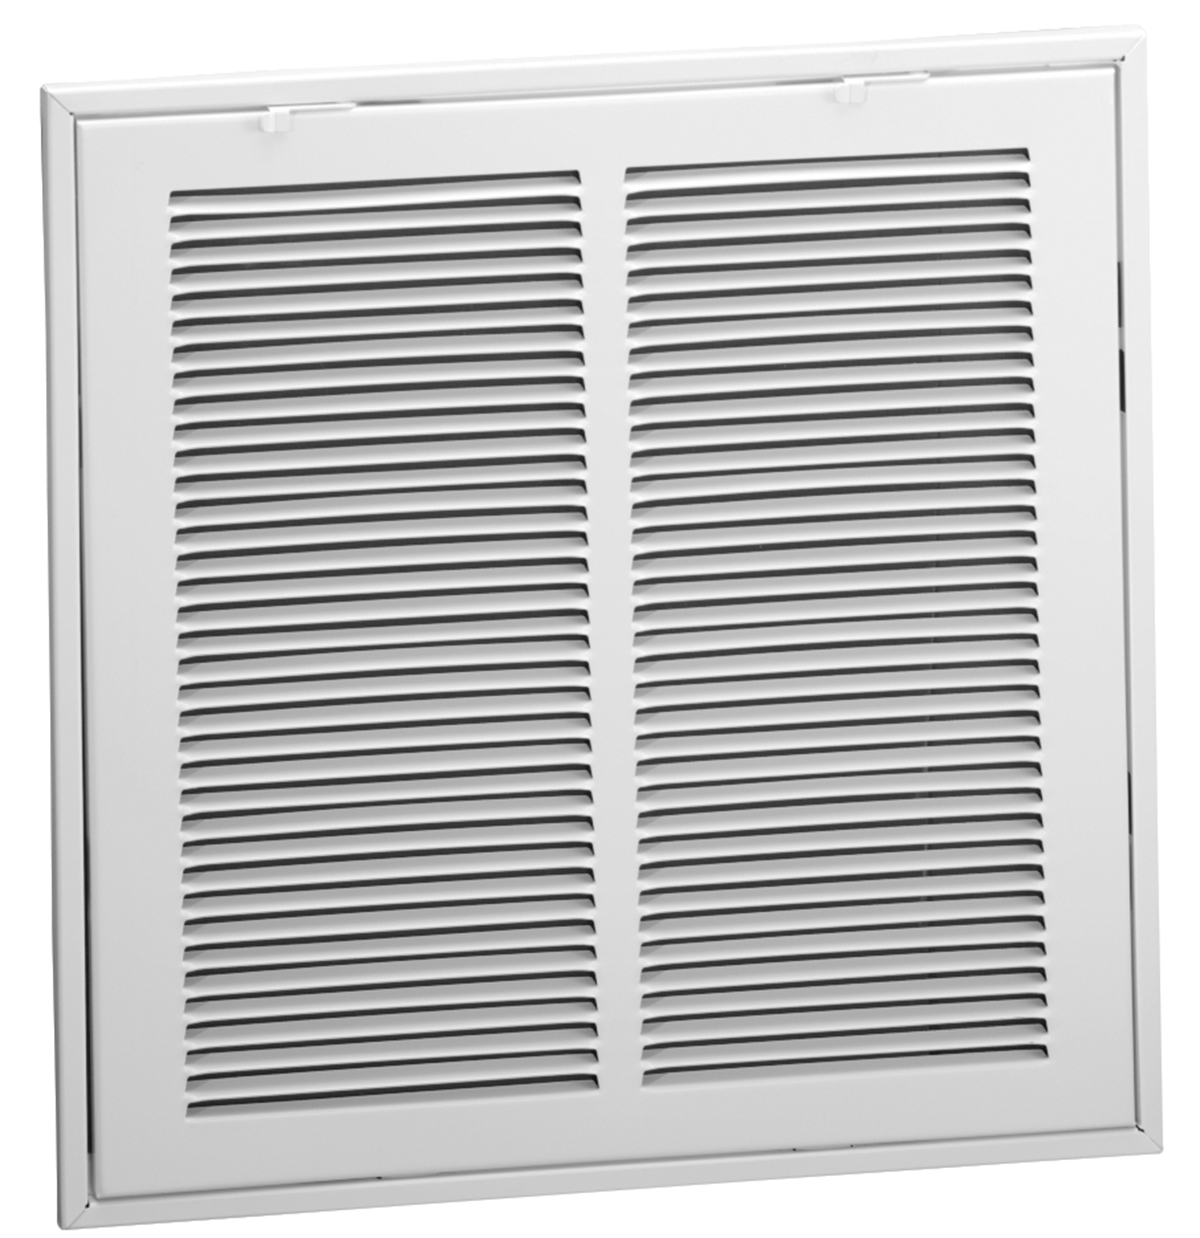 659 - STEEL RETURN AIR FILTER GRILLE - 1/3&quot; FIN SPACING